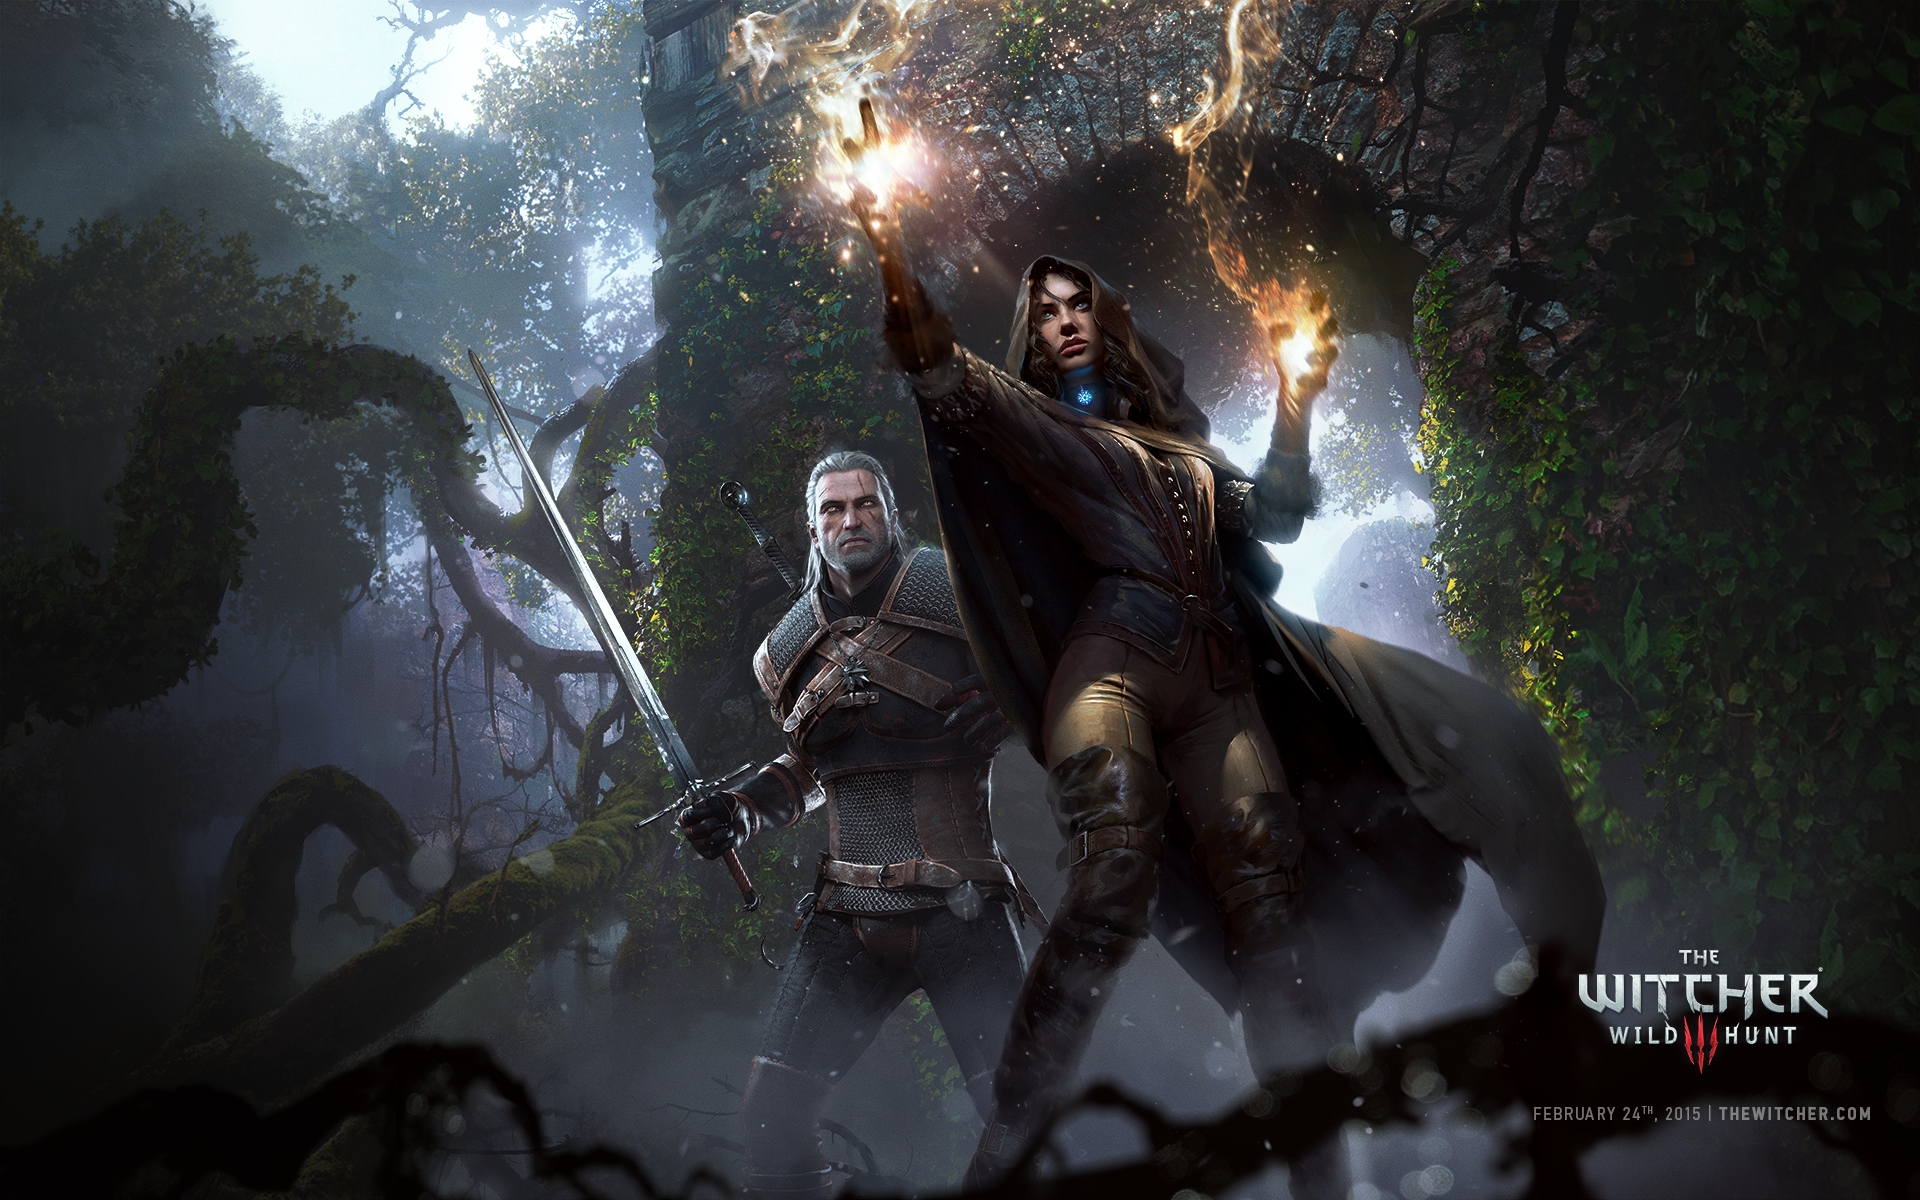 the witcher 3: wild hunt, the witcher, geralt of rivia, video game, yennefer of vengerberg Phone Background